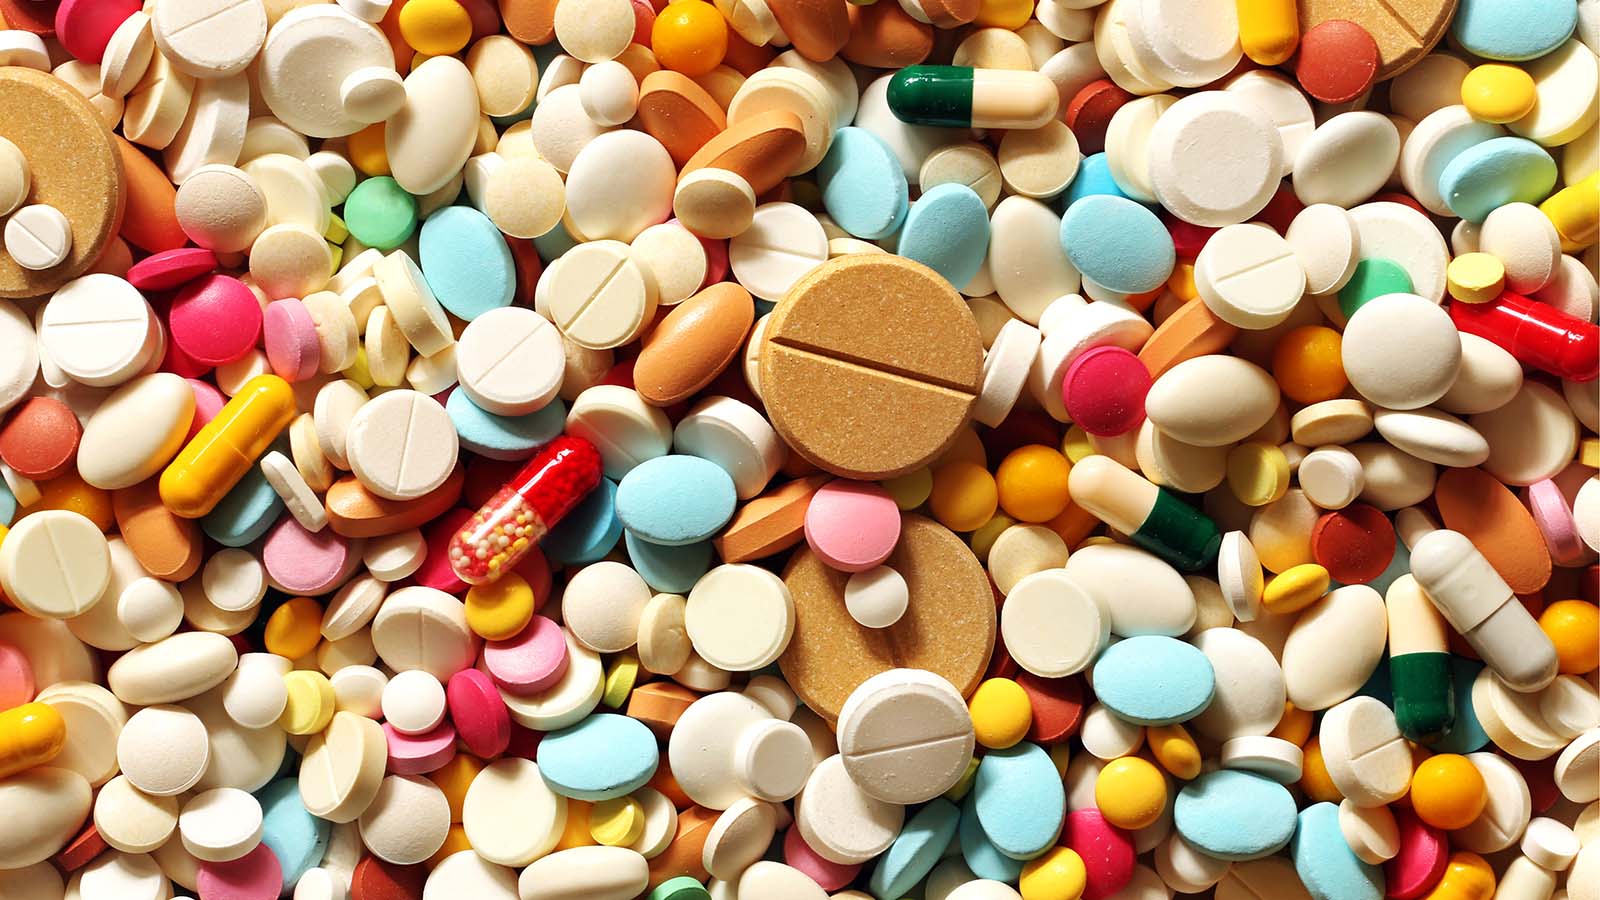 A pile of brightly colored pills in varying sizes and shapes representing VKTX stock.